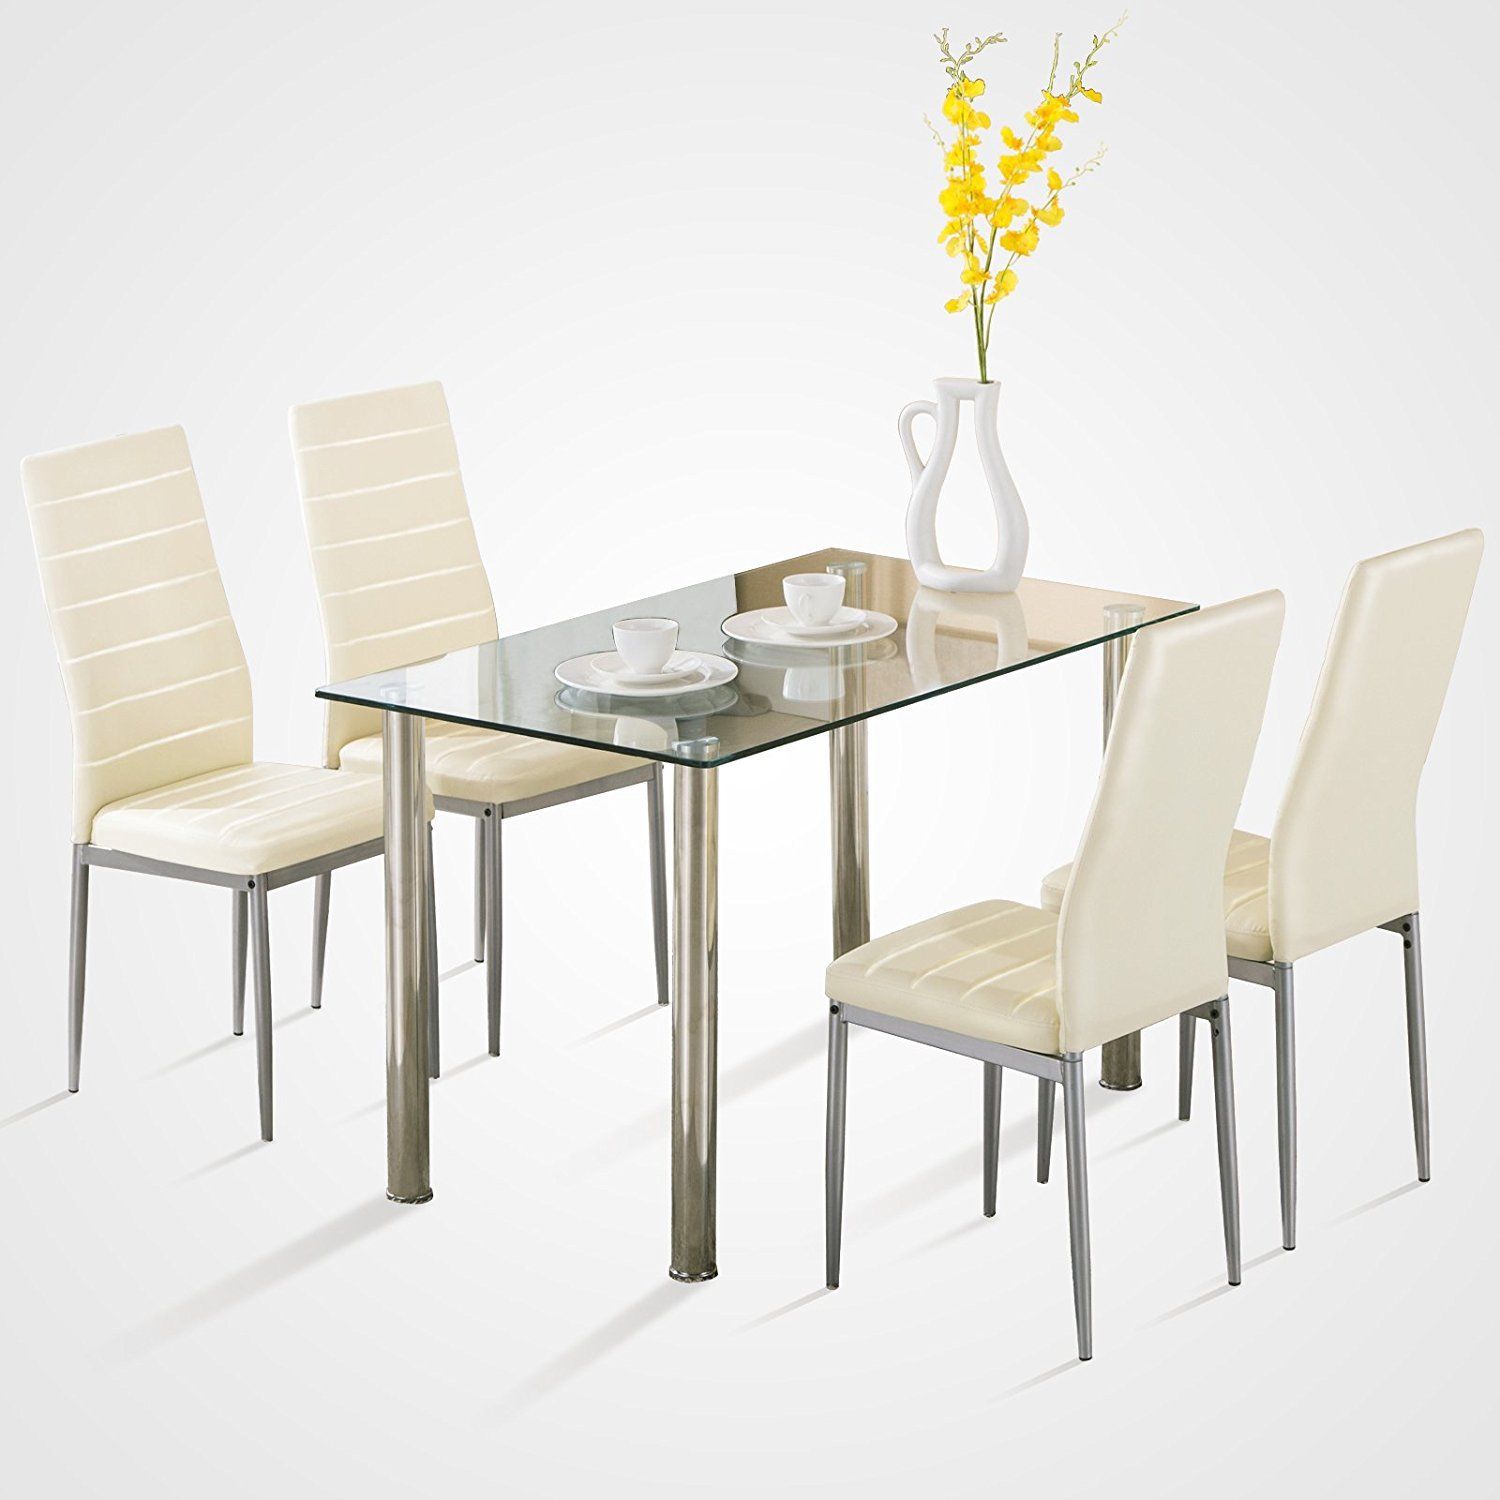 Zimtown 5 Piece Dining Table Set White 4 Chair Glass Metal Kitchen Dining Room Breakfast - image 2 of 9